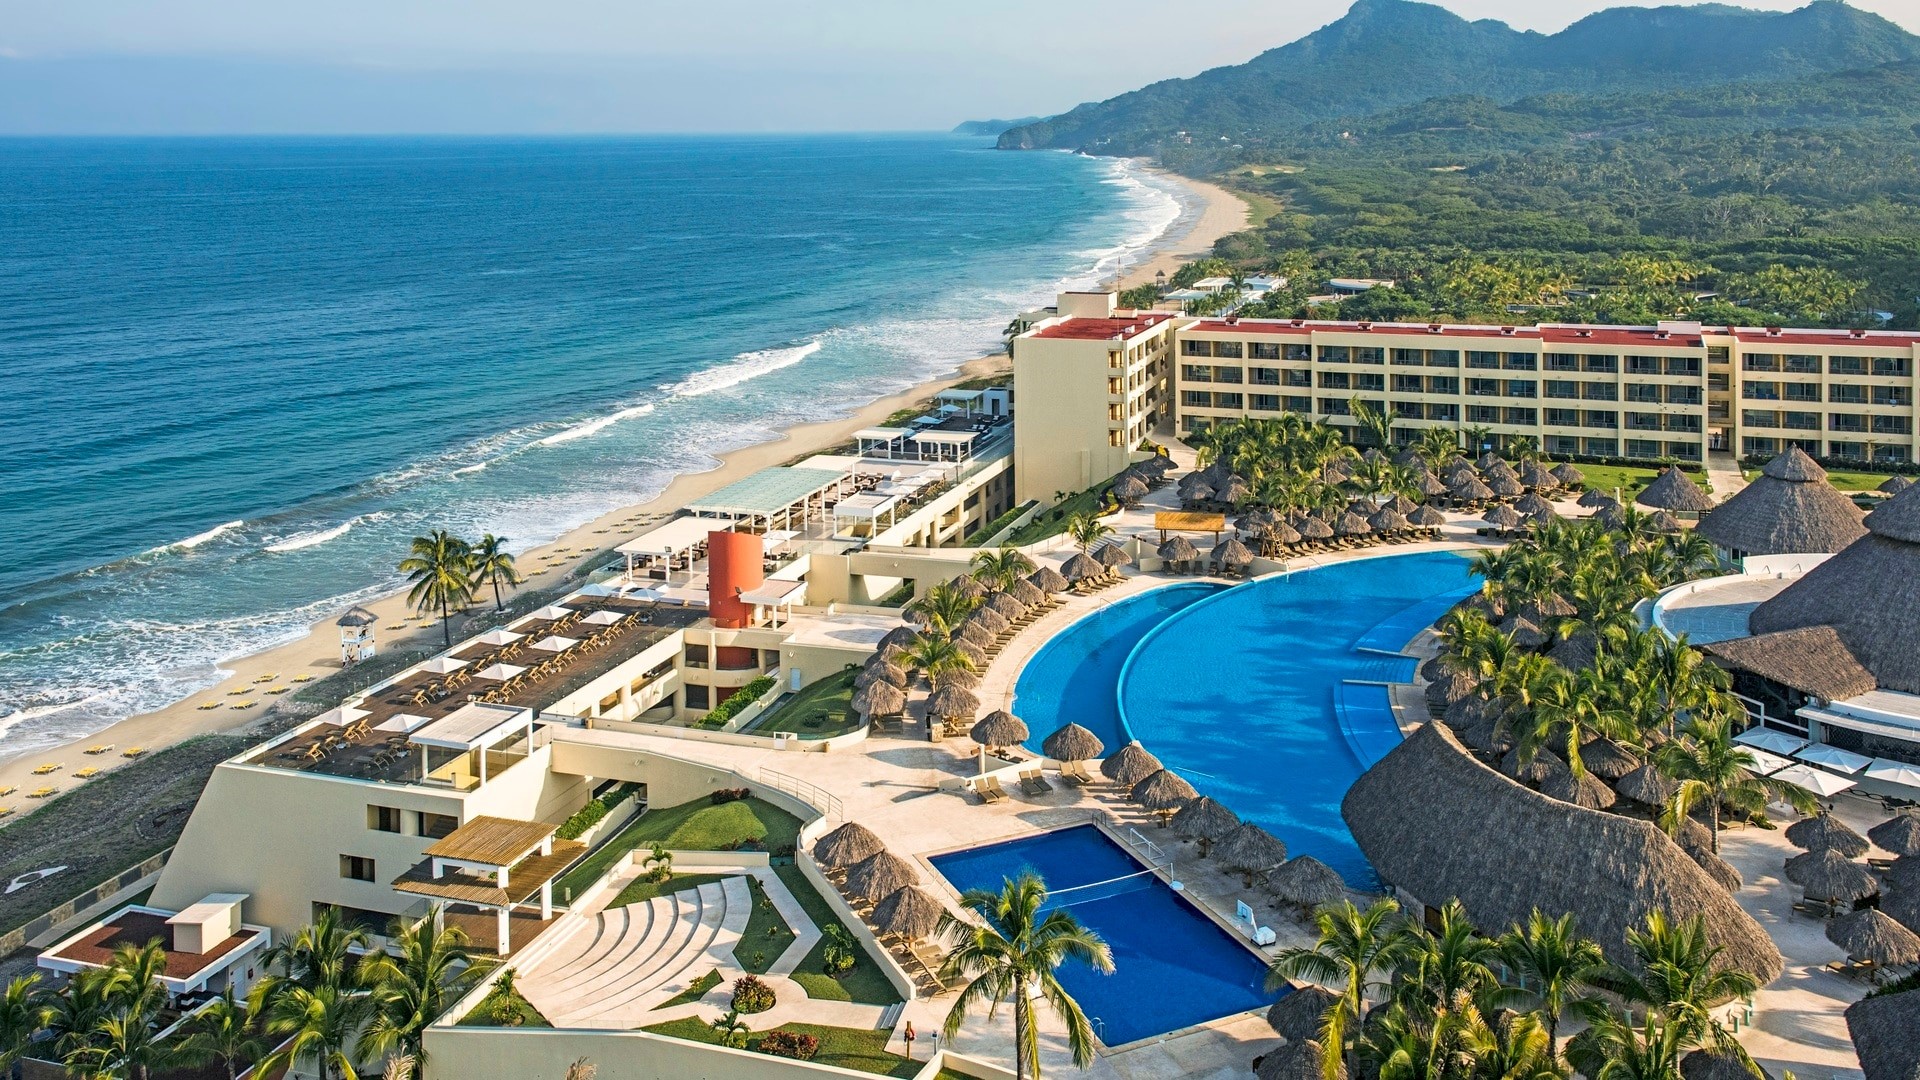 Wyndham, Iberostar and Xcaret to reopen hotels in Mexico